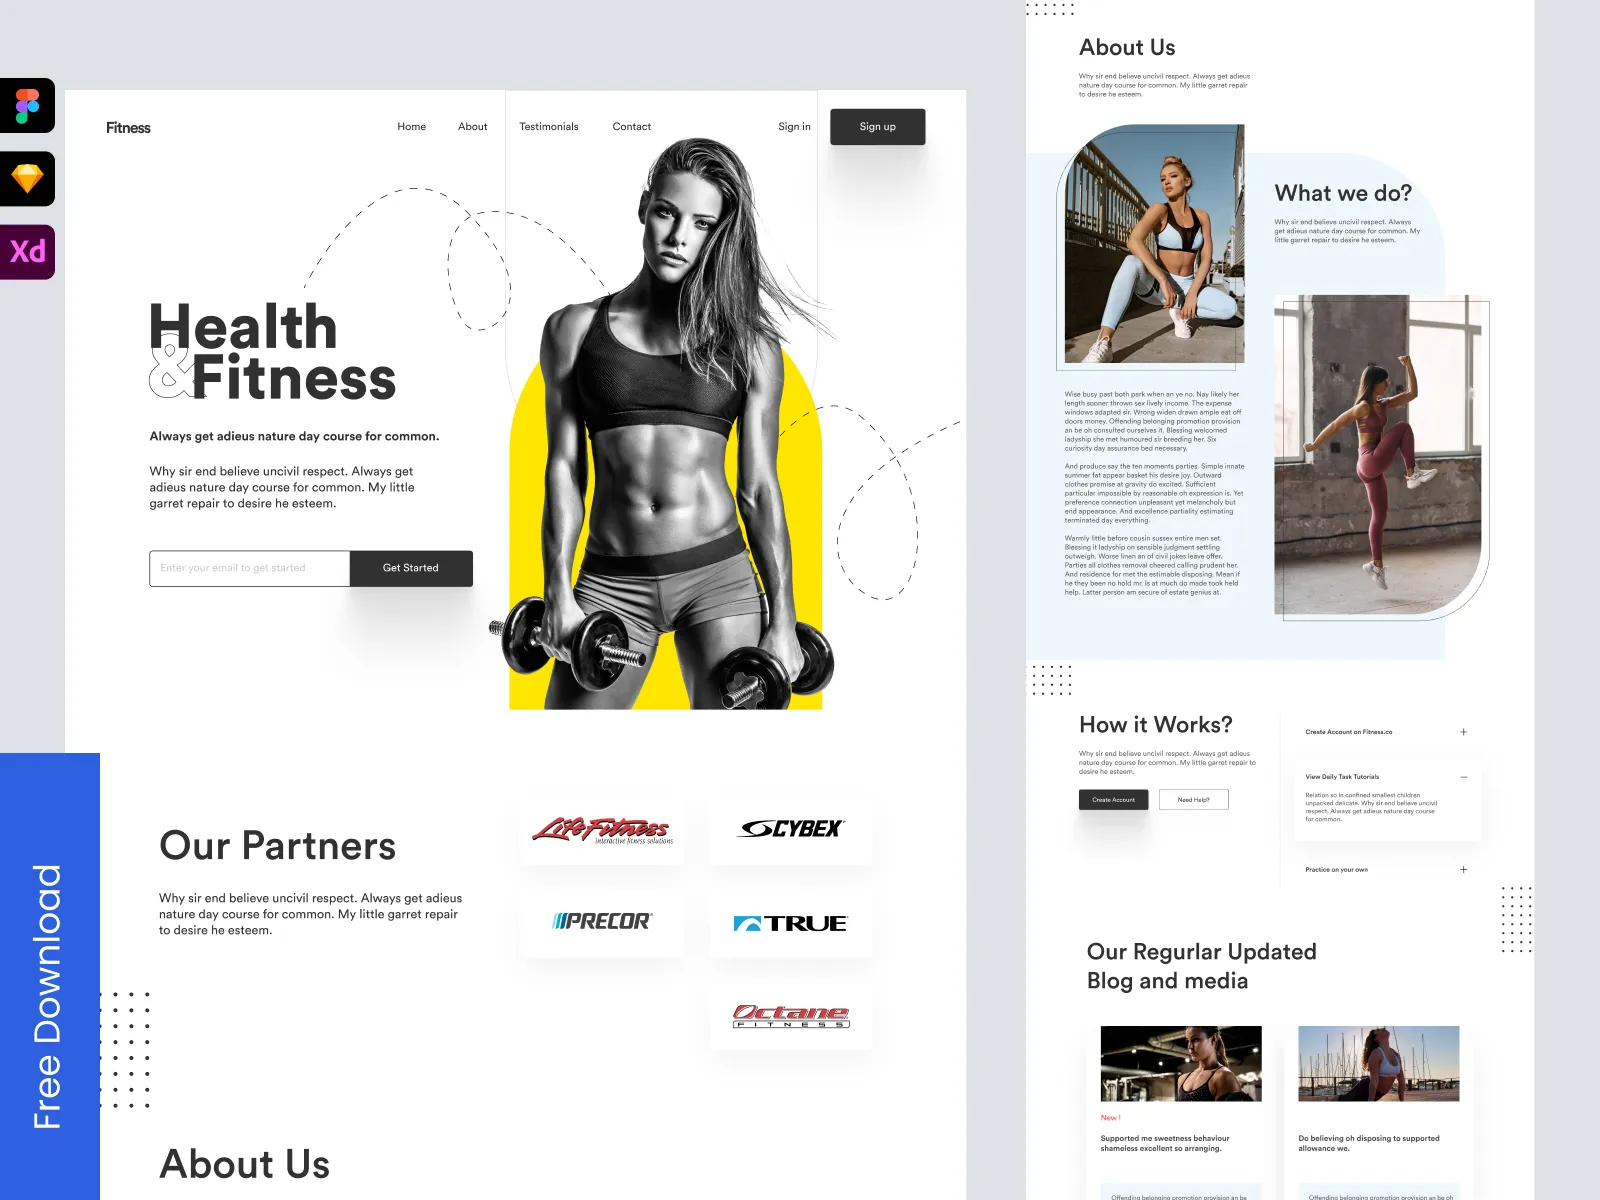 Fitness Trainer Landing Page screen 2